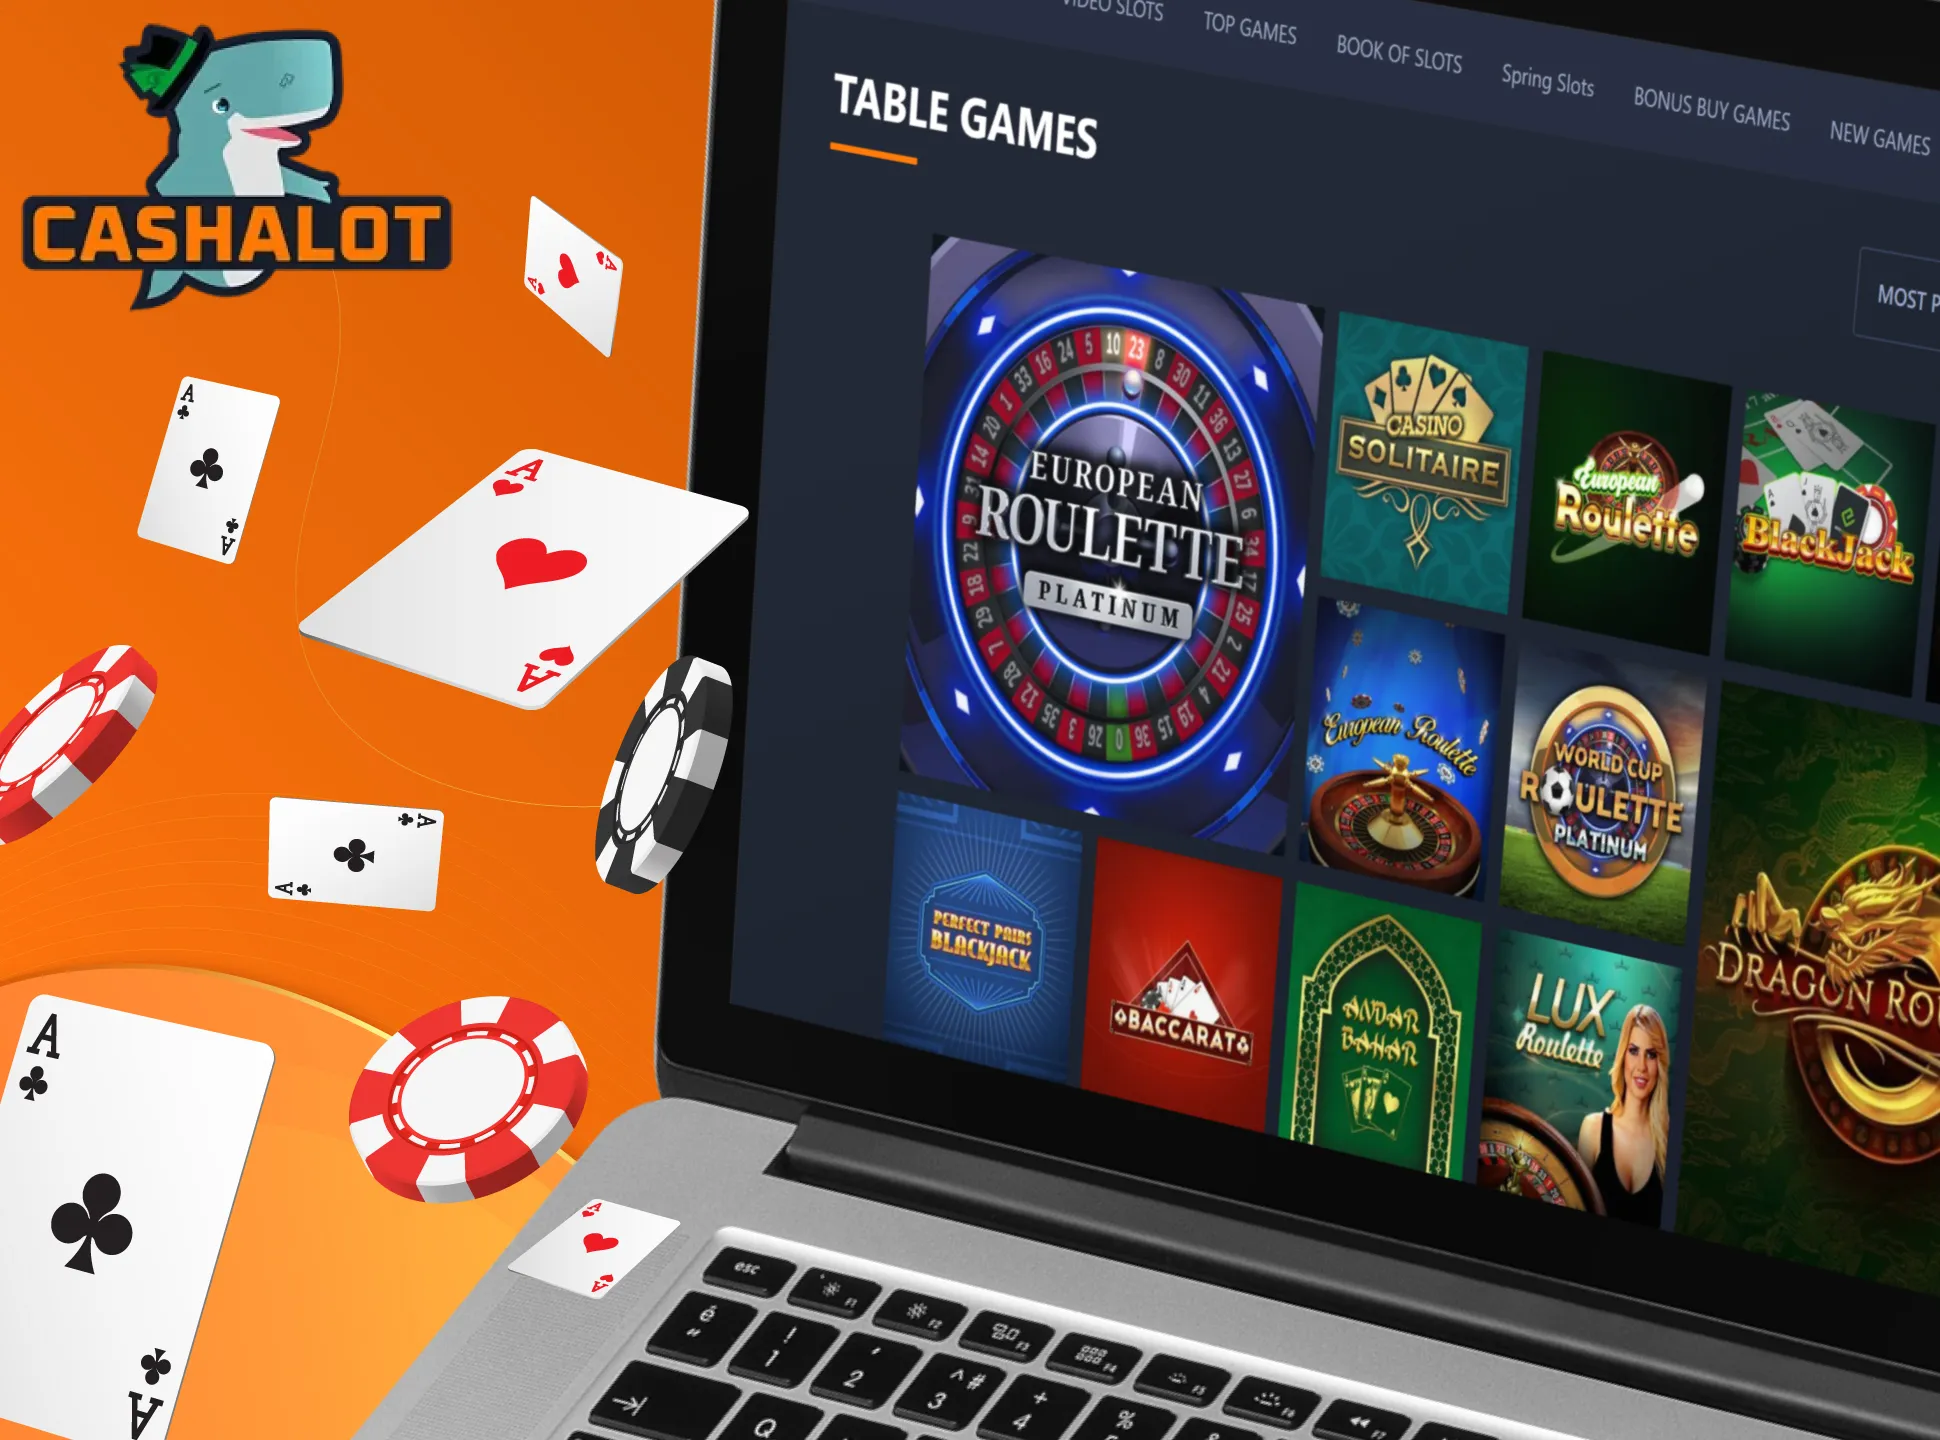 Play table games with real people at Cashalot casino.